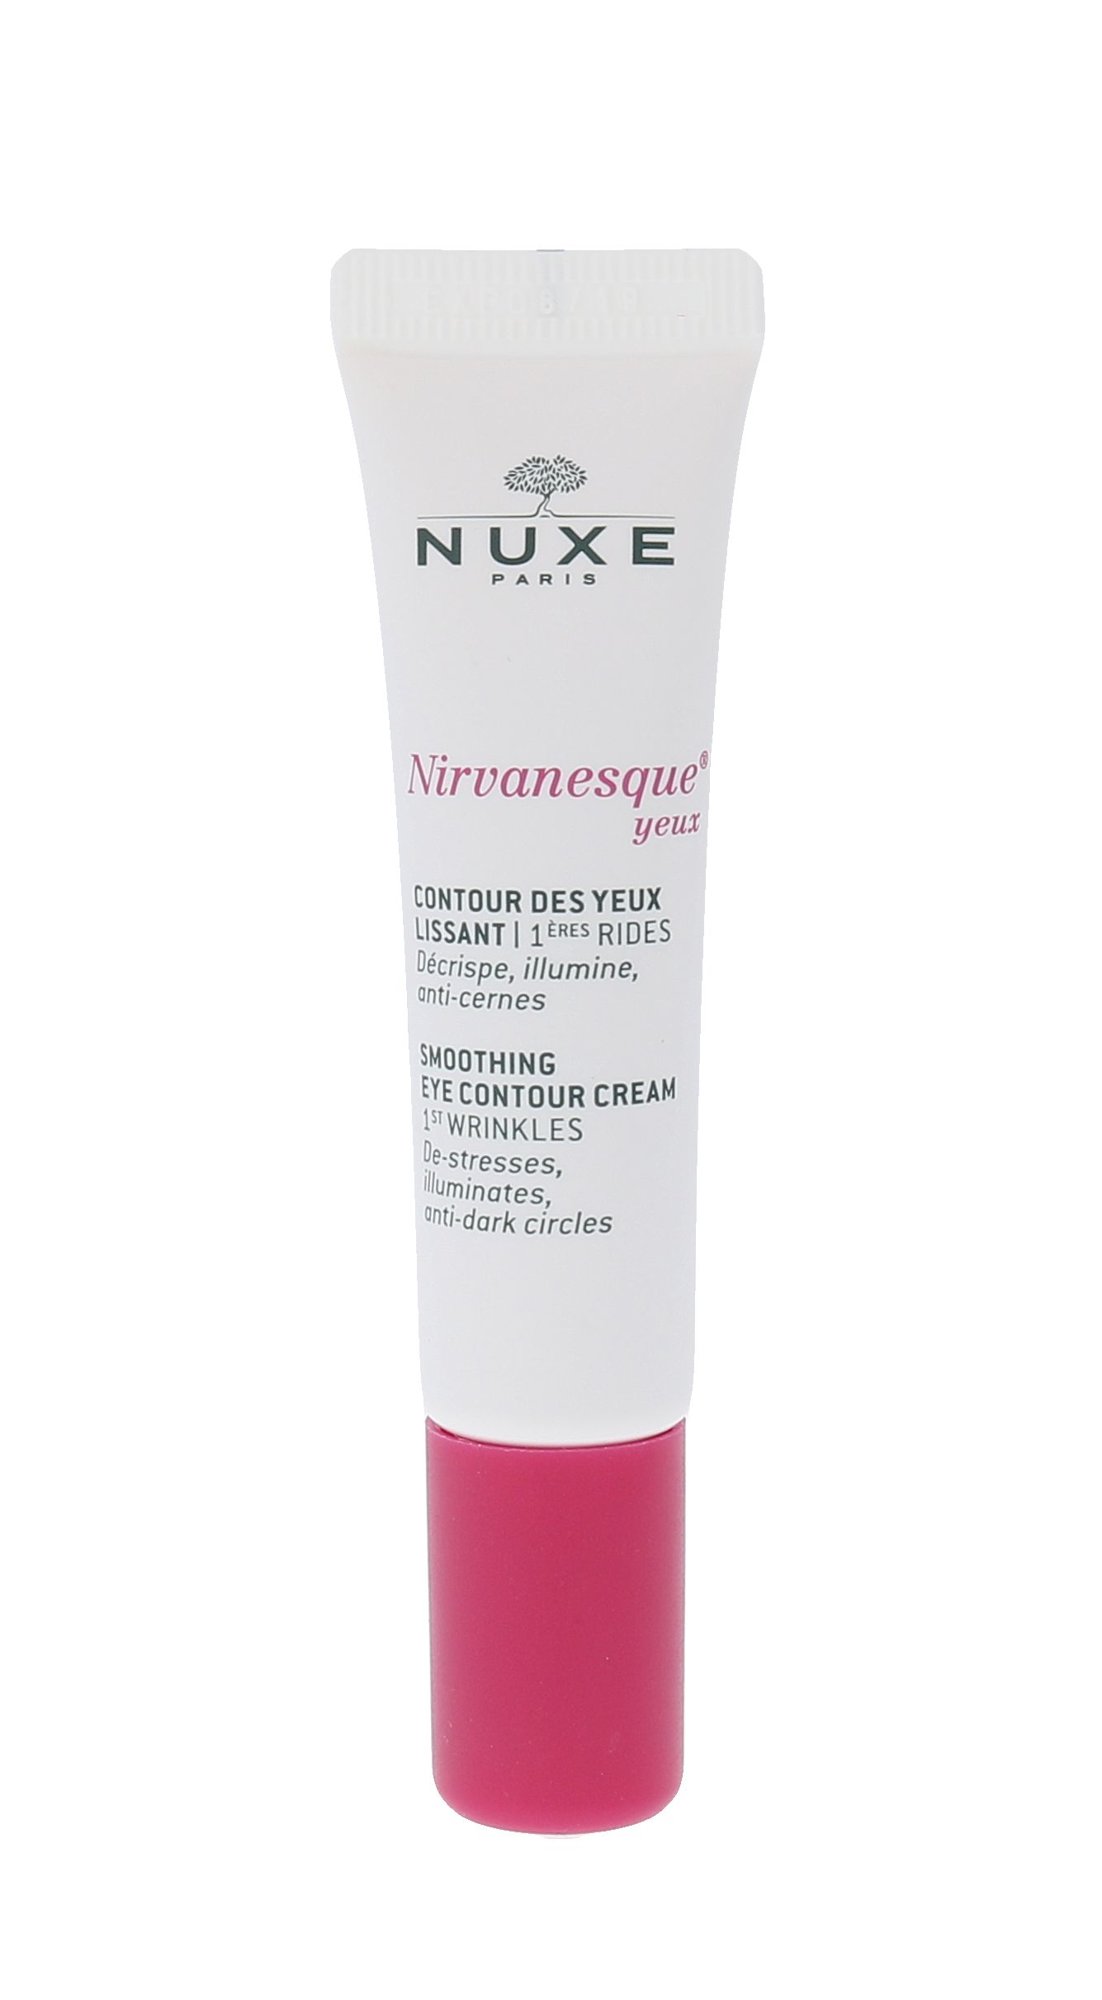 Nuxe Nirvanesque 1st Wrinkles Smoothing Eye Cream